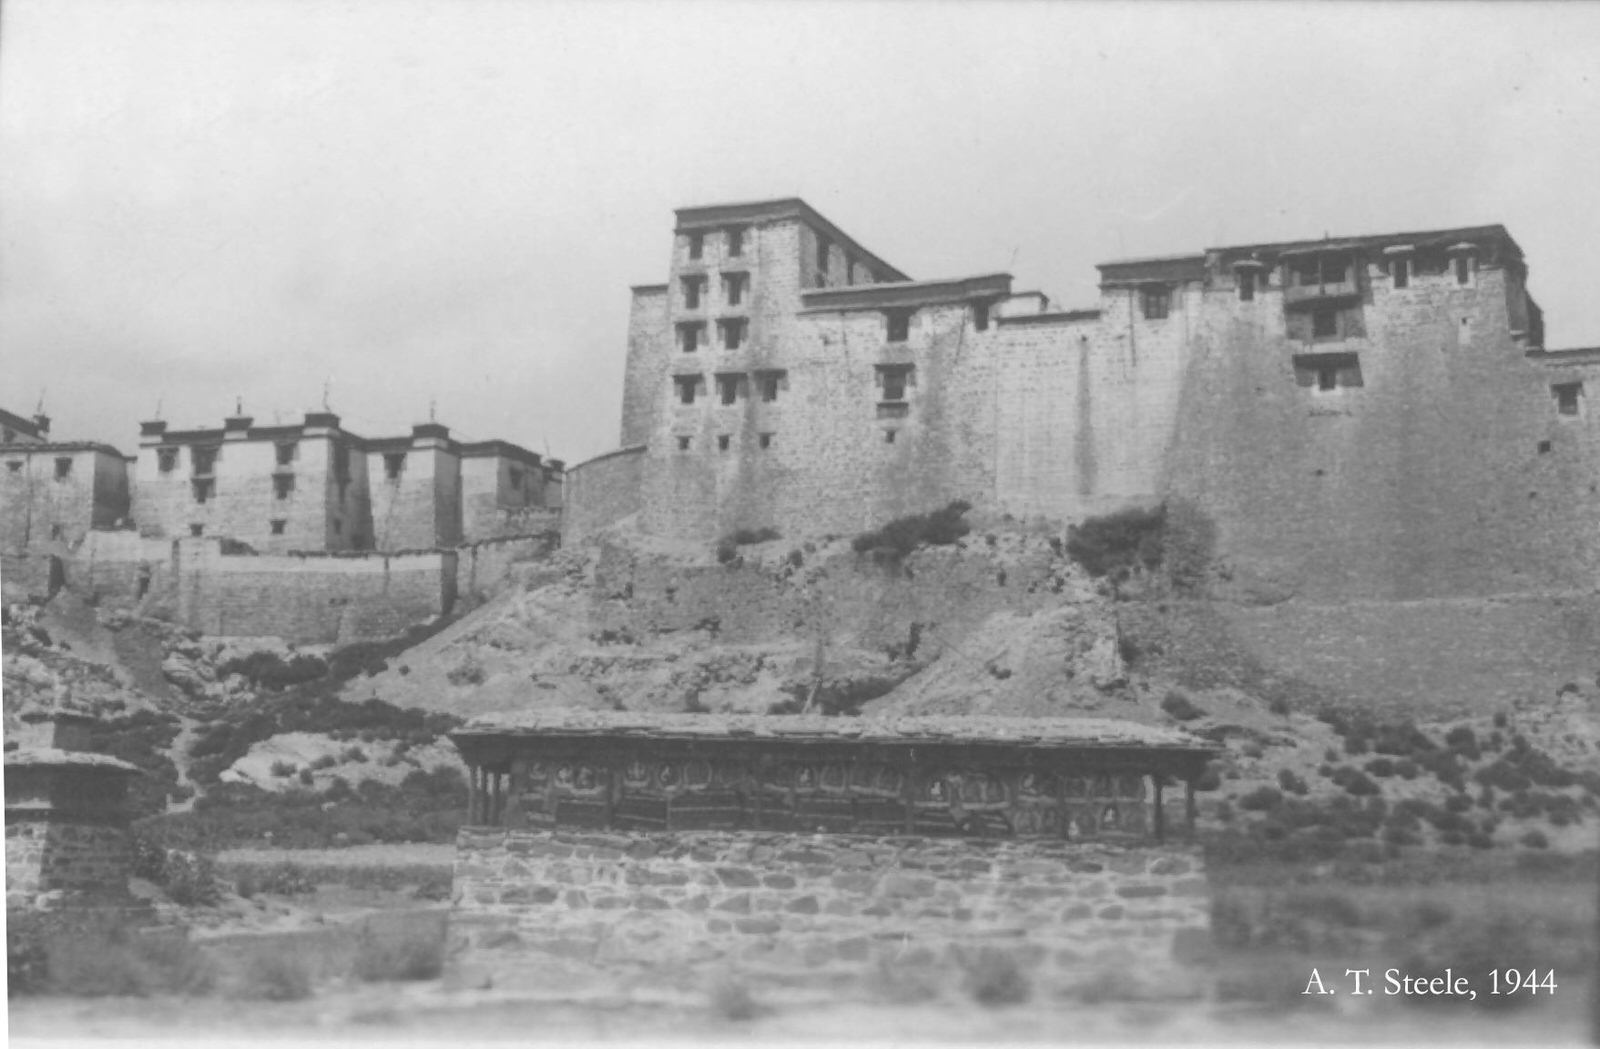 The Fort of Nangartse, 1944. The fort of Nangartse, on the trail to Lhasa in central Tibet.